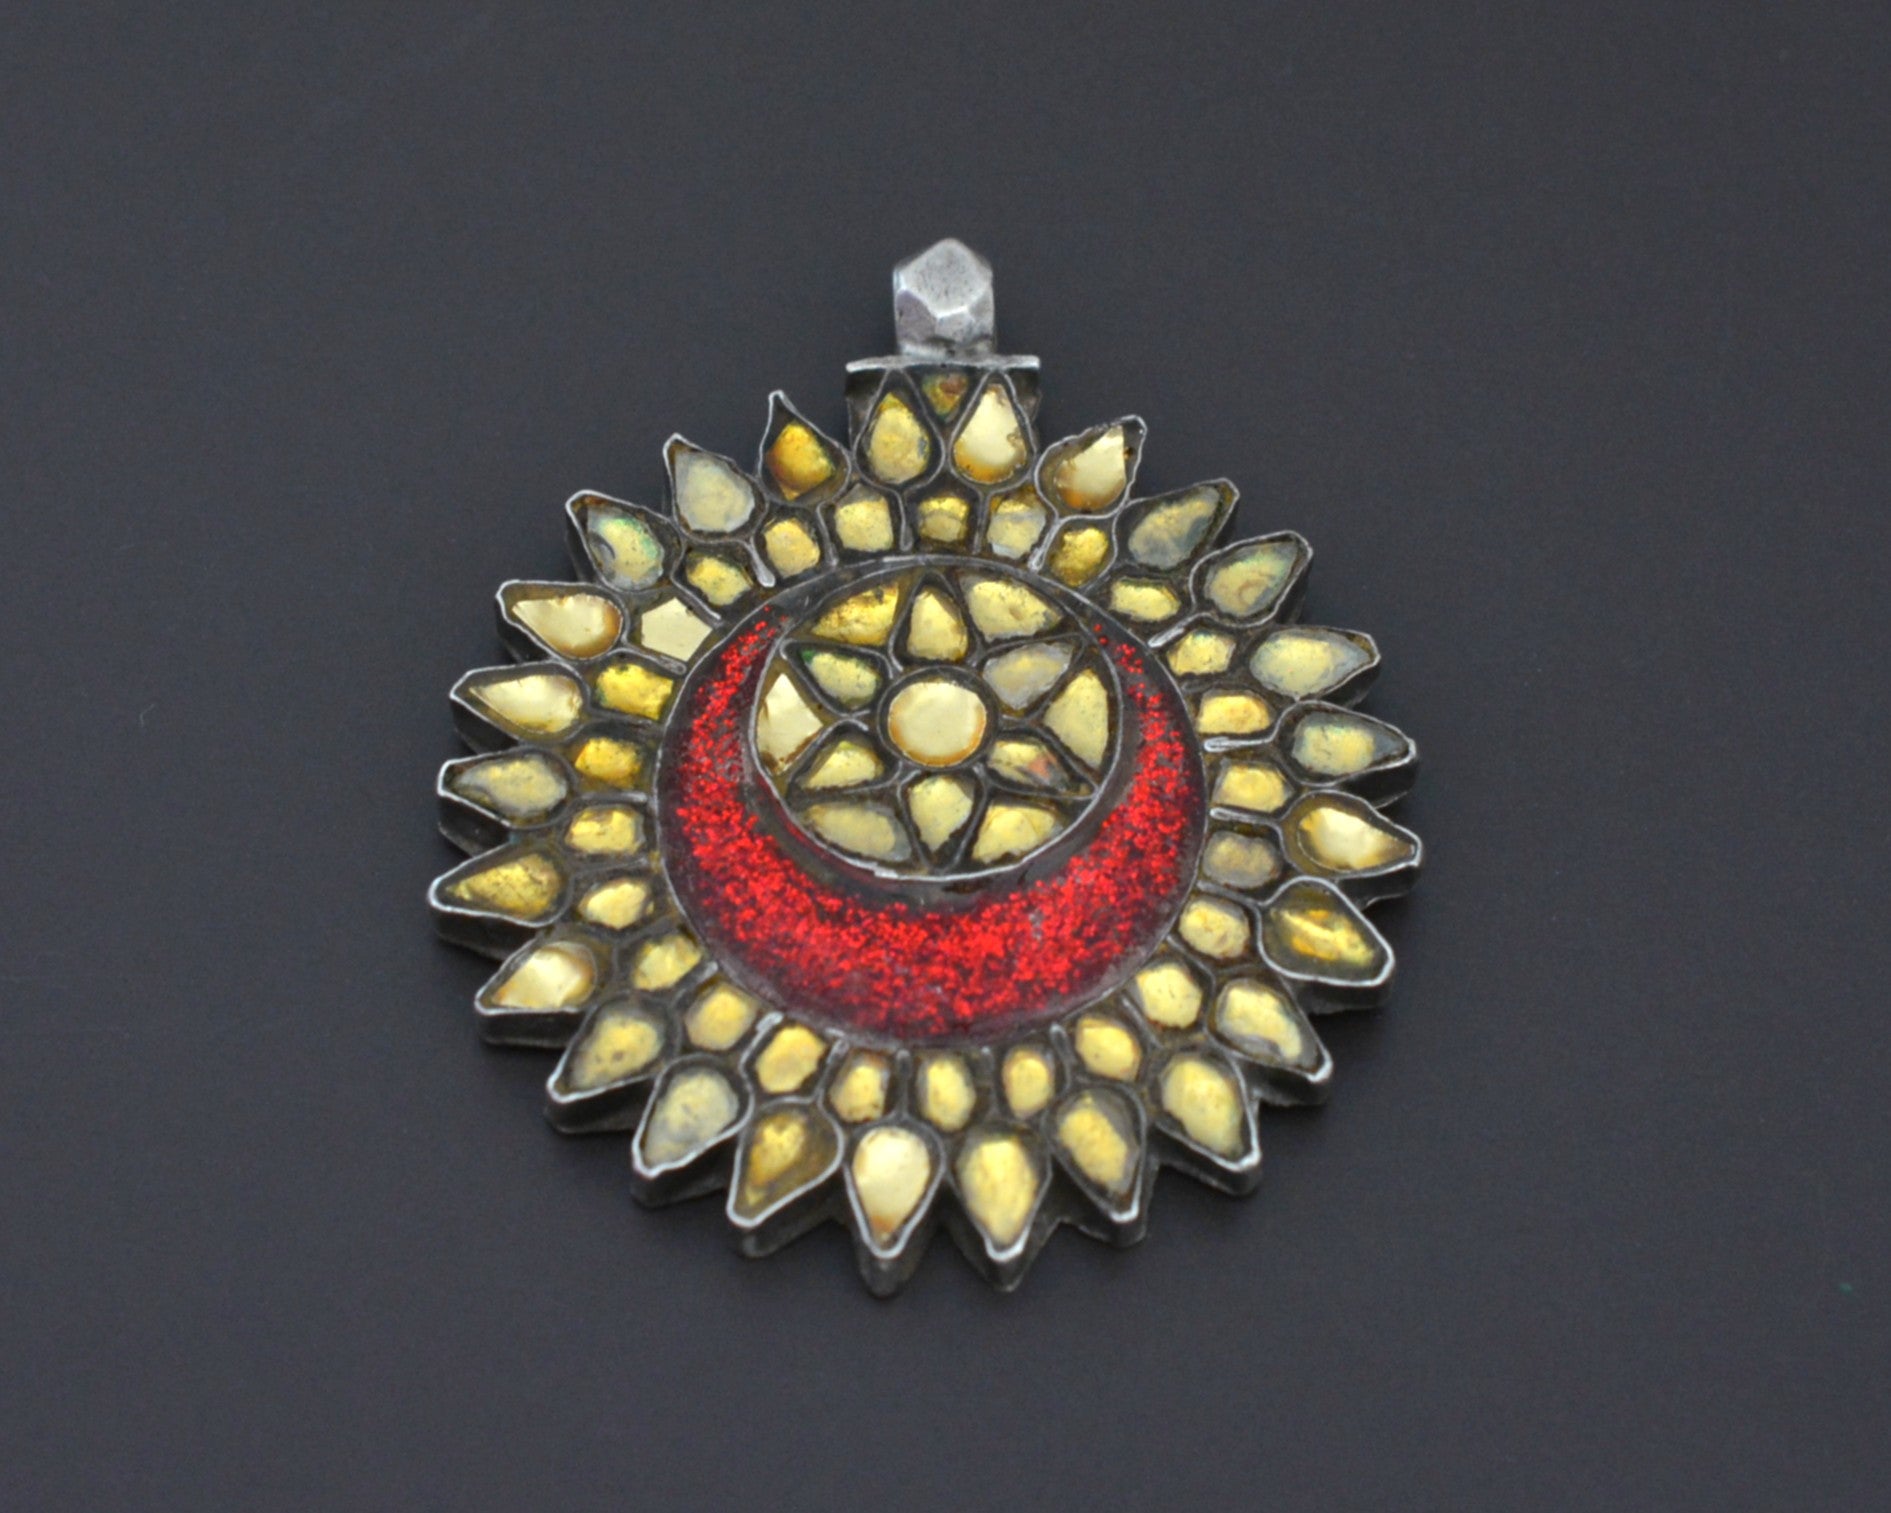 Indian Silver Pendant with Glass Inserts from Uttar Pradesh